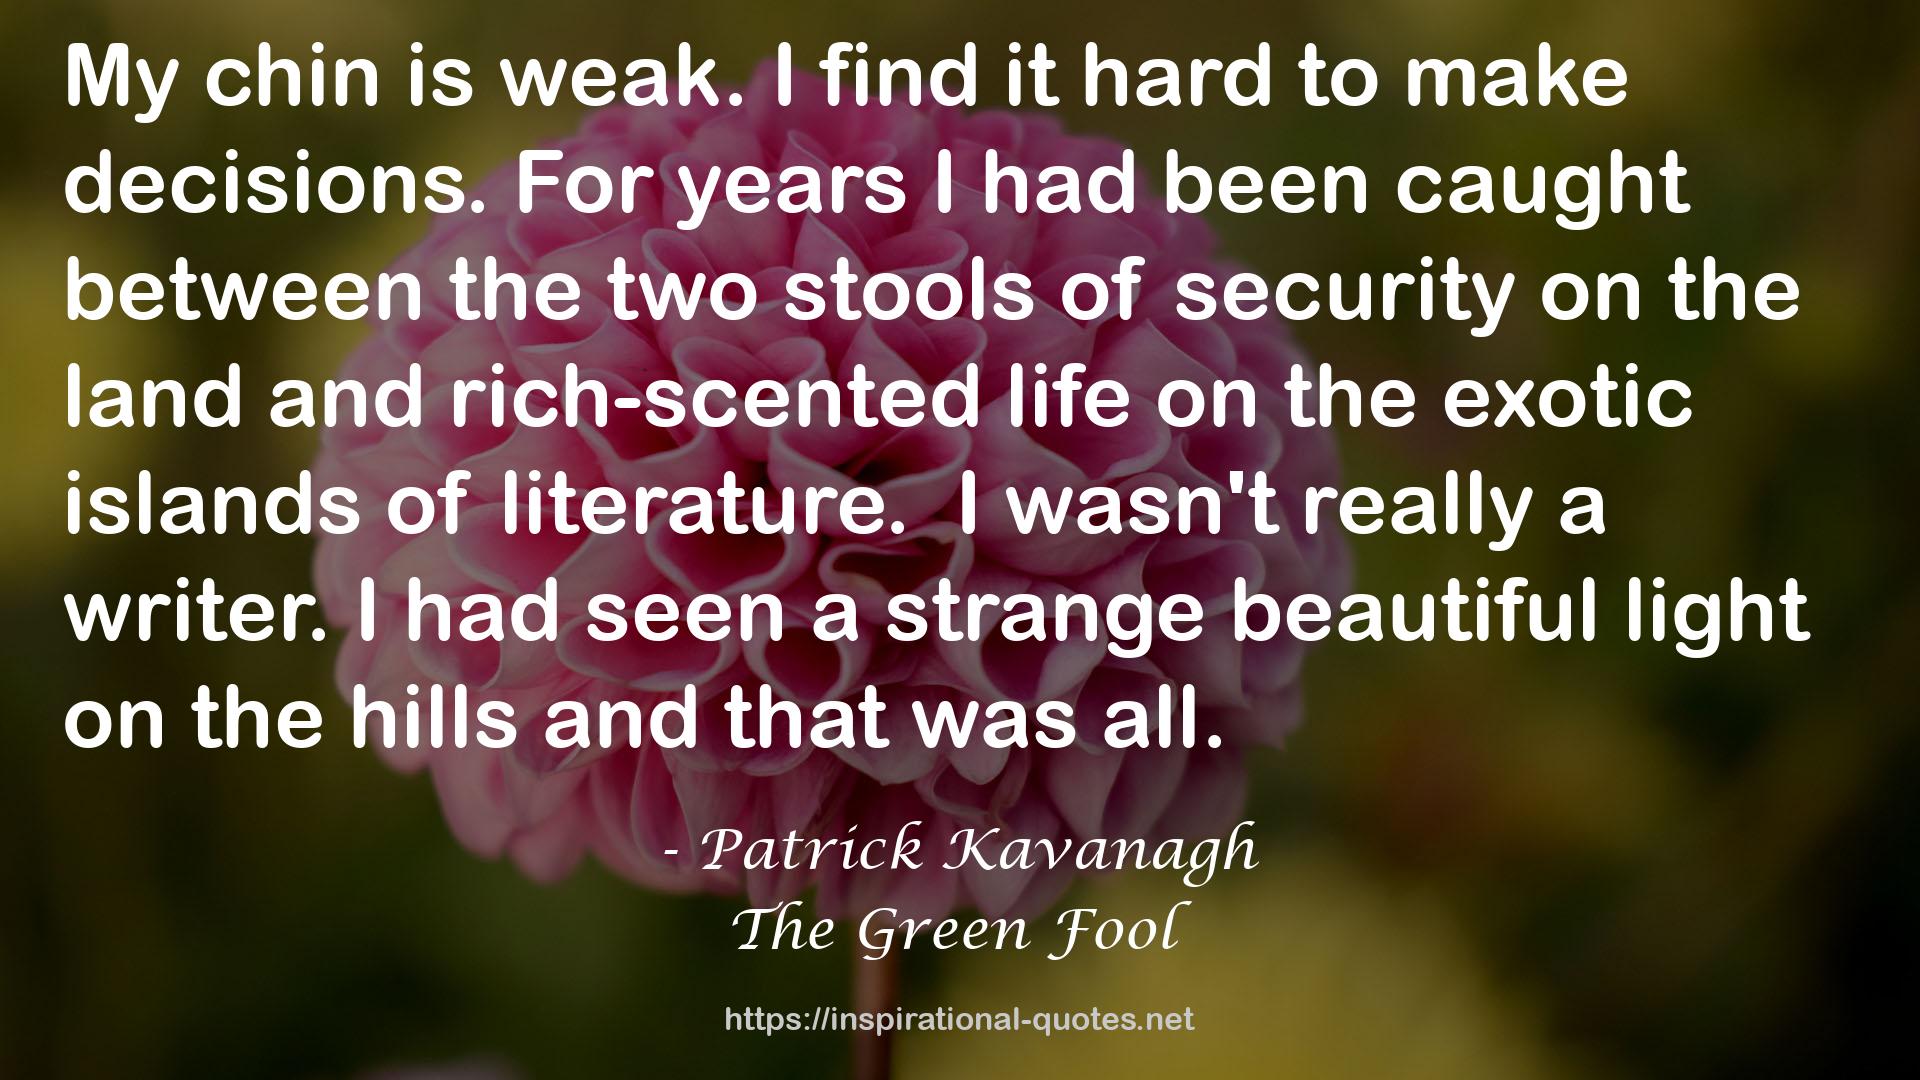 The Green Fool QUOTES